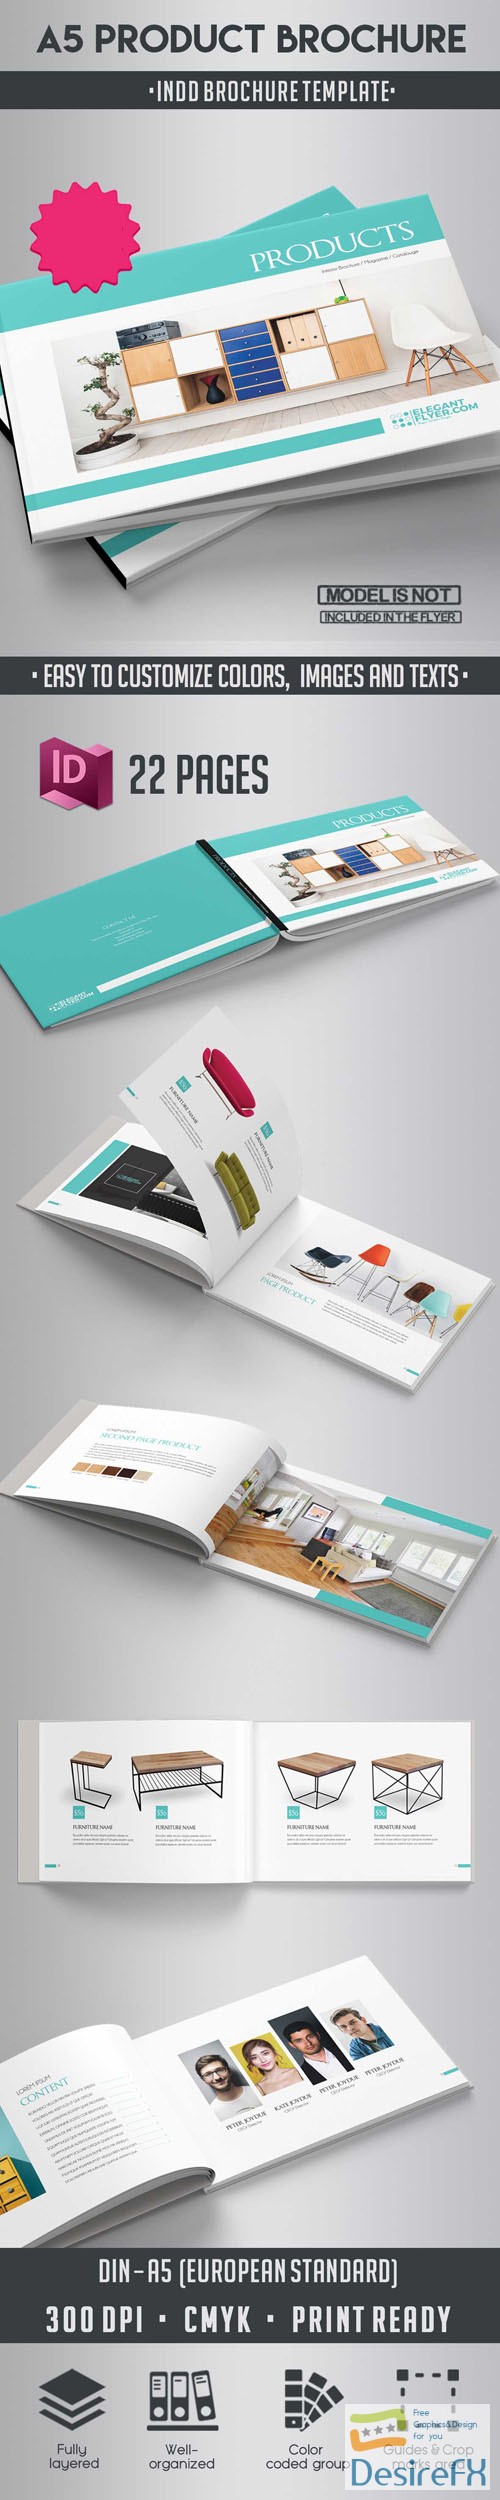 A5 Product Catalog Brochure INDD Template